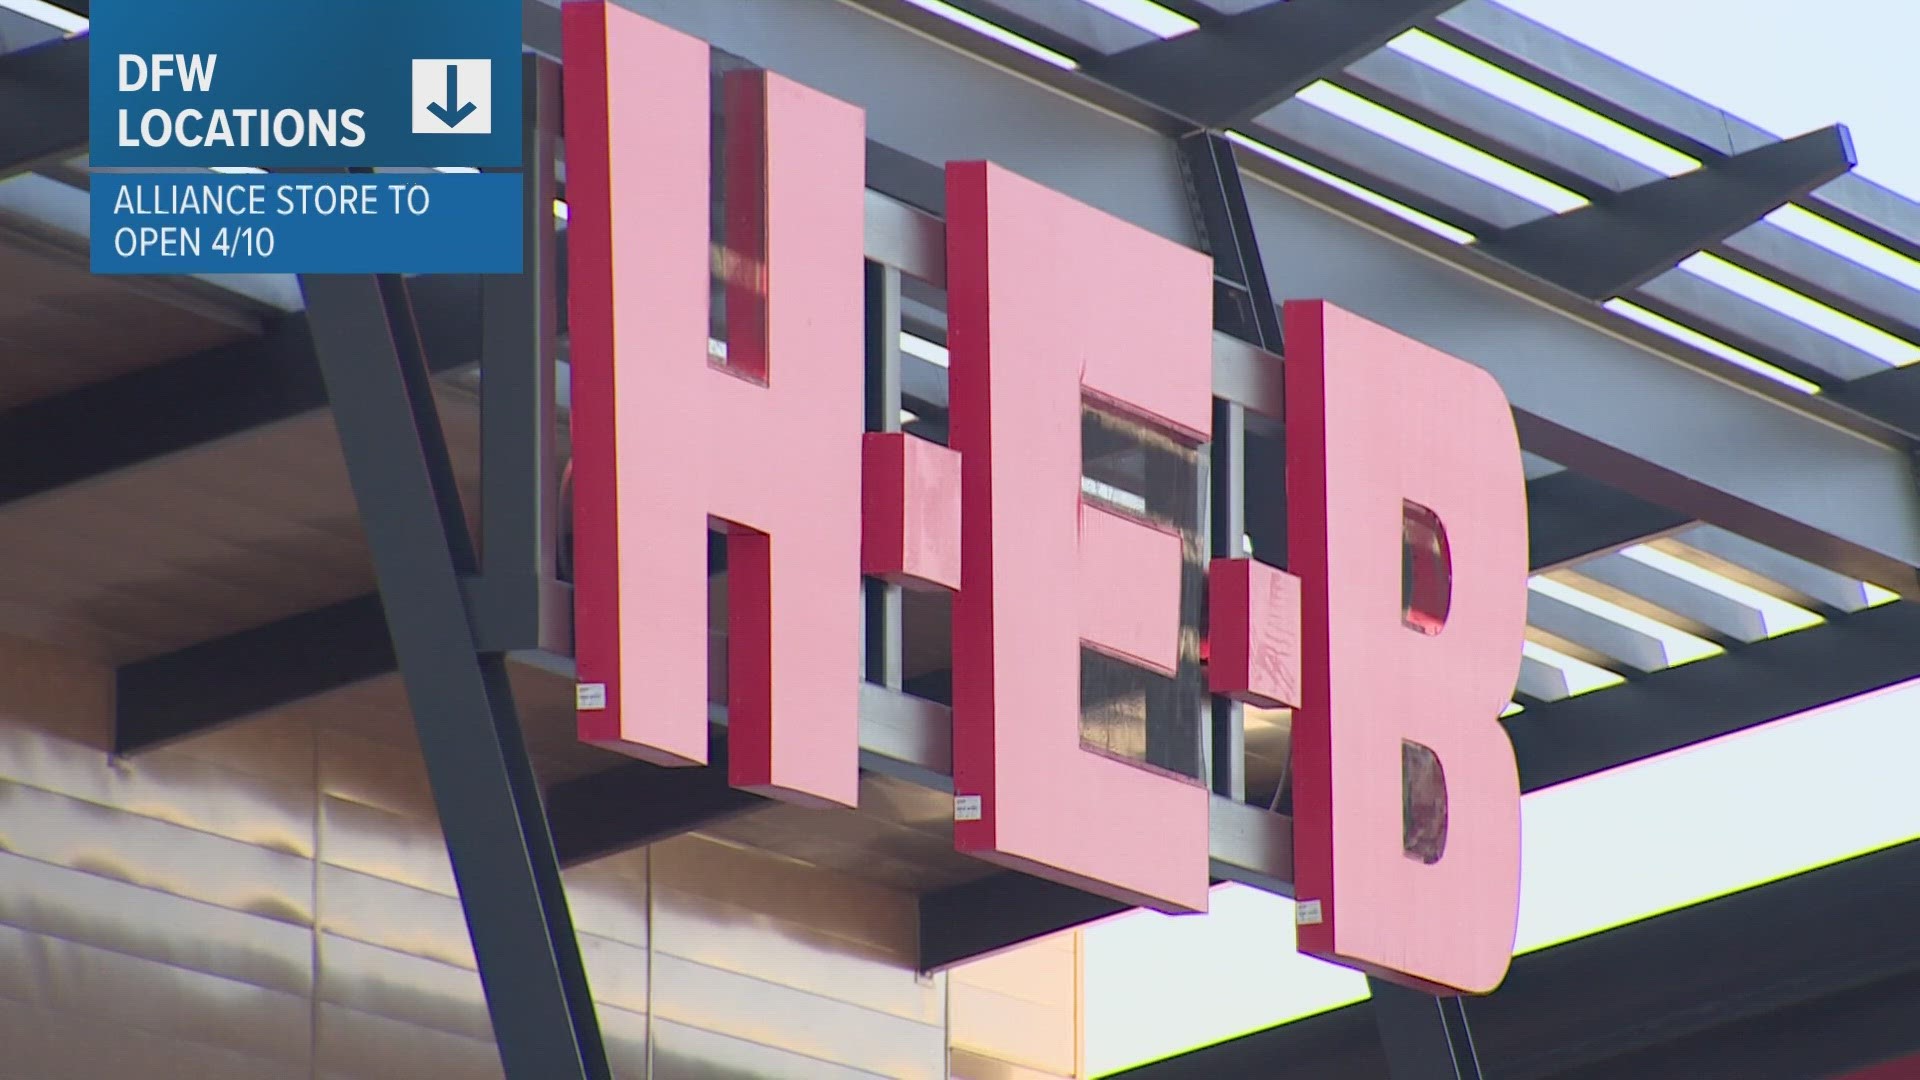 Officials in Murphy and Euless announced H-E-B is coming to their cities.